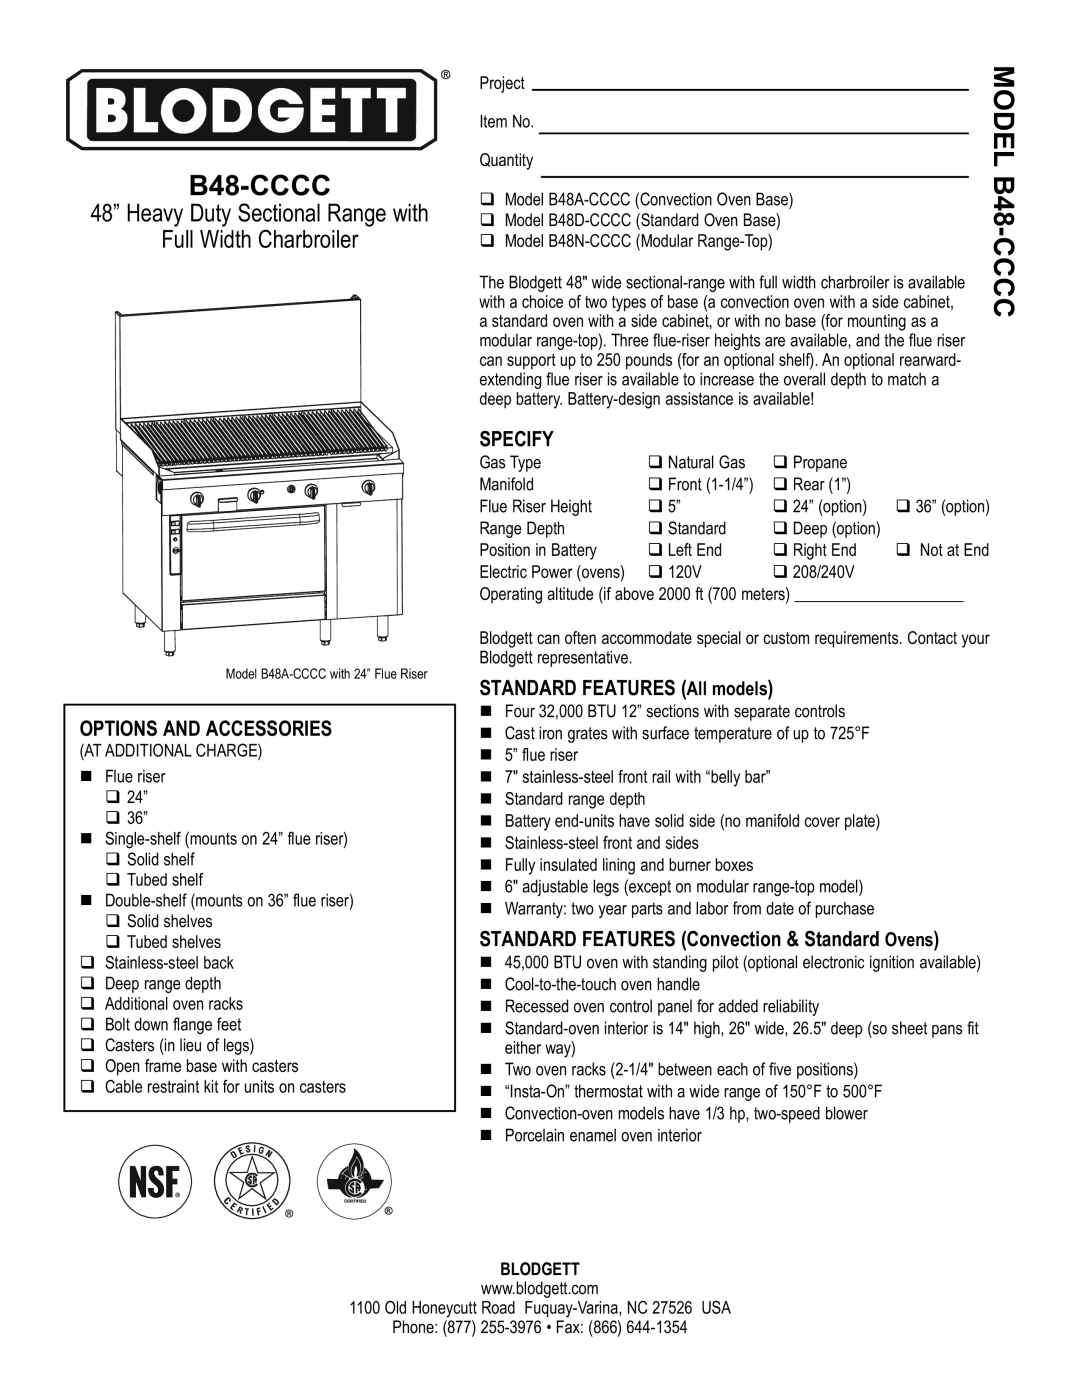 Blodgett B48A-CCCC warranty B48-CCCC, Options And Accessories, Specify, STANDARD FEATURES All models, Blodgett, Cccc 